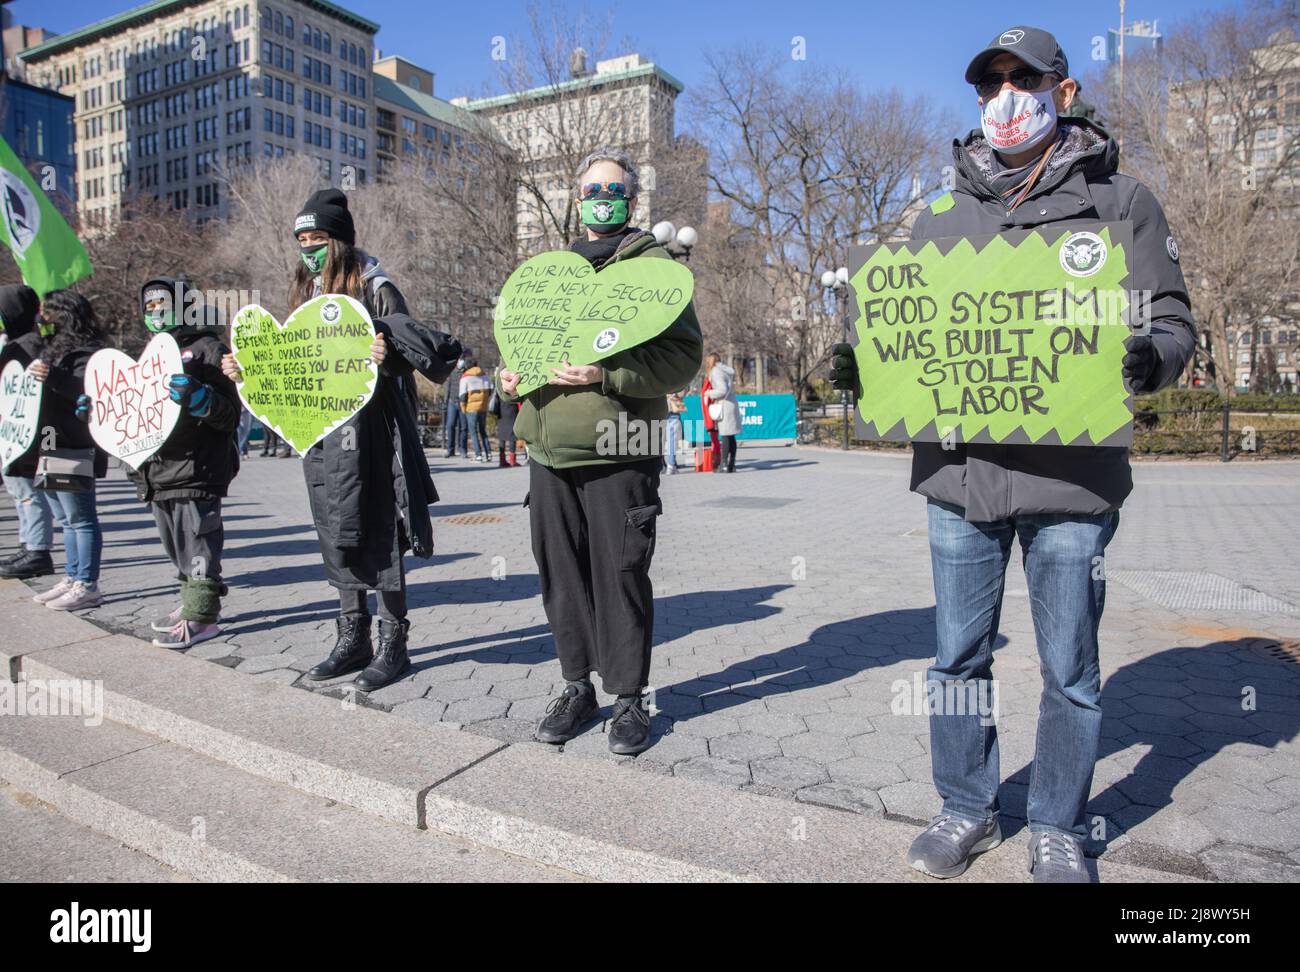 NEW YORK, N.Y. – March 7, 2021: Animal rights supporters demonstrate in New York City's Union Square Park. Stock Photo